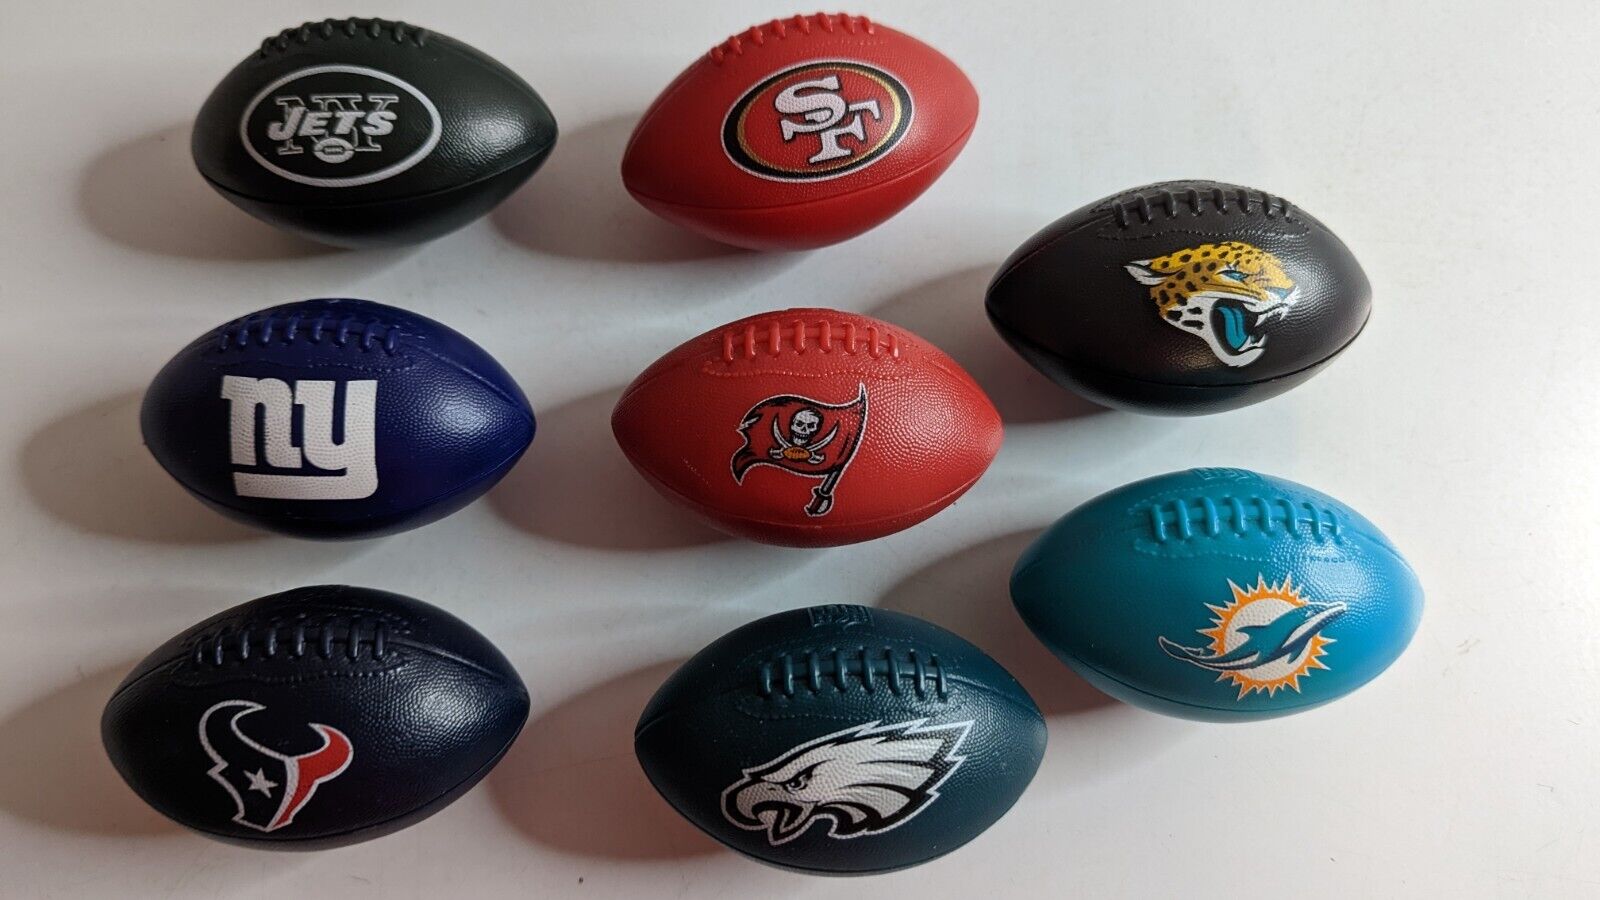 Lot of 8 NFL Football Teams Footballs 49'ers, Dolphins, Jets, Giants, Eagles Unbranded